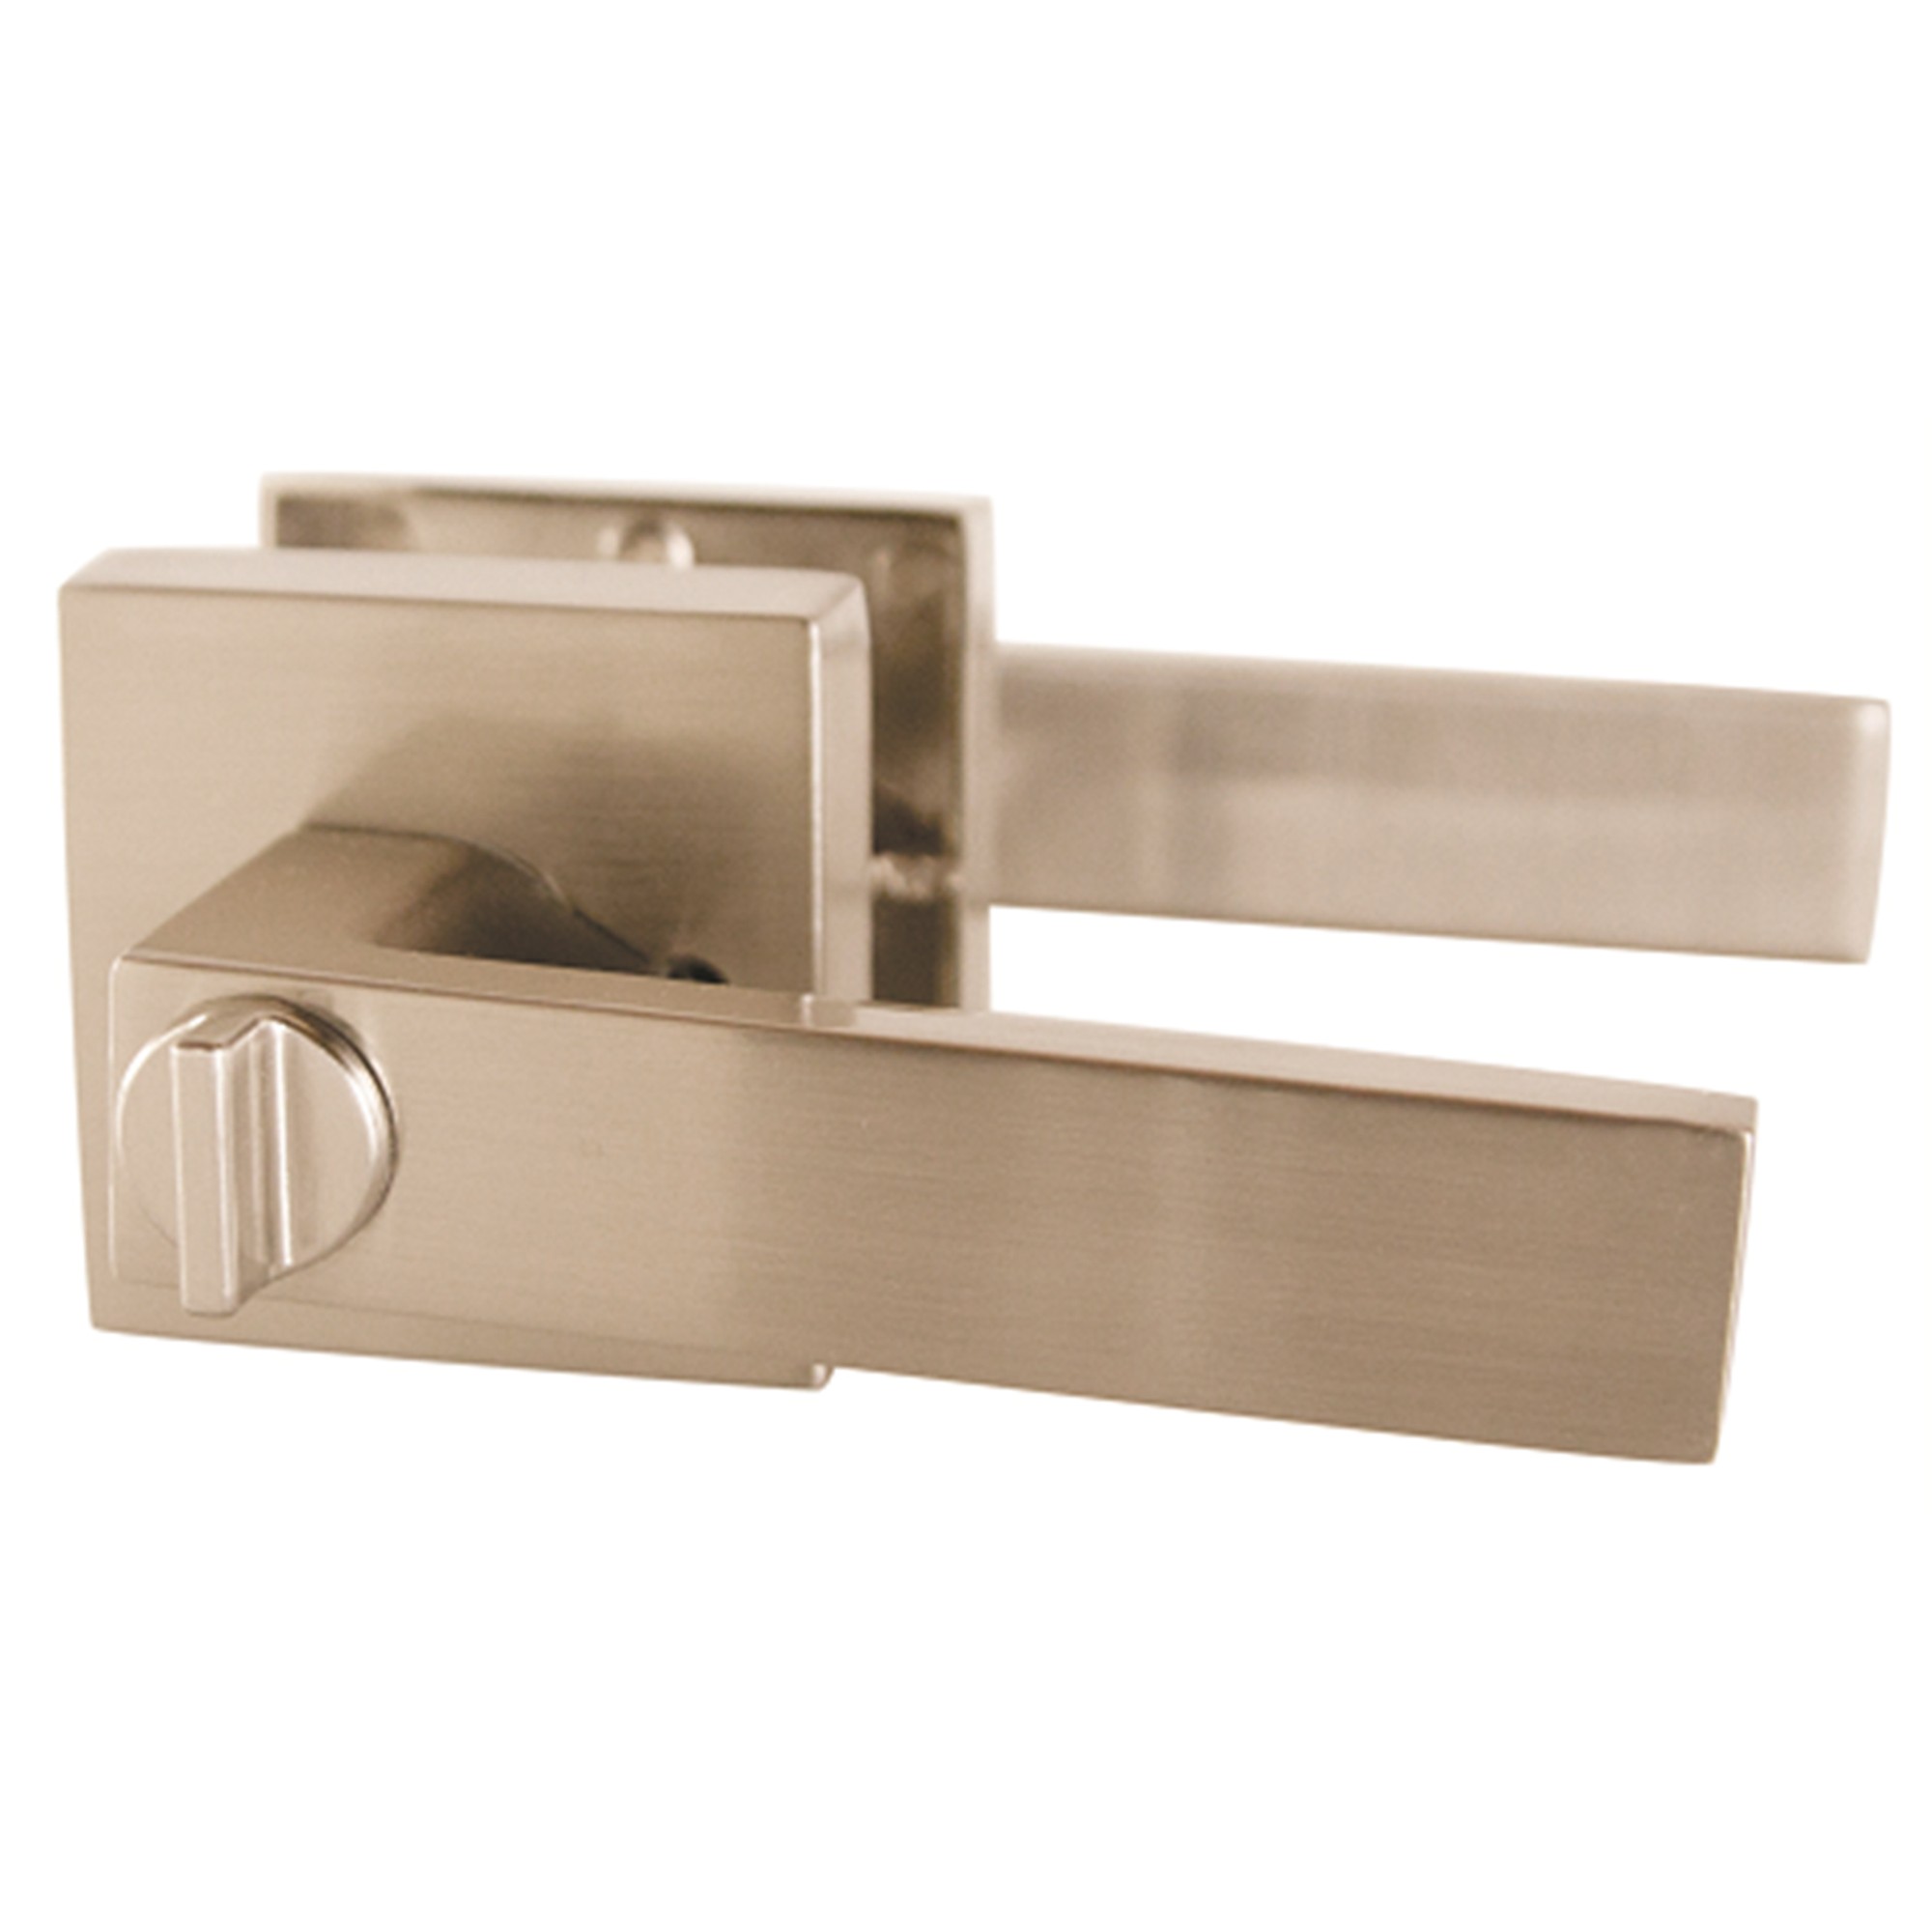 Design House 581116 Karsen Bed and Bath Lever, Reversible for Left or Right Handed Doors, Satin Nickel Finish